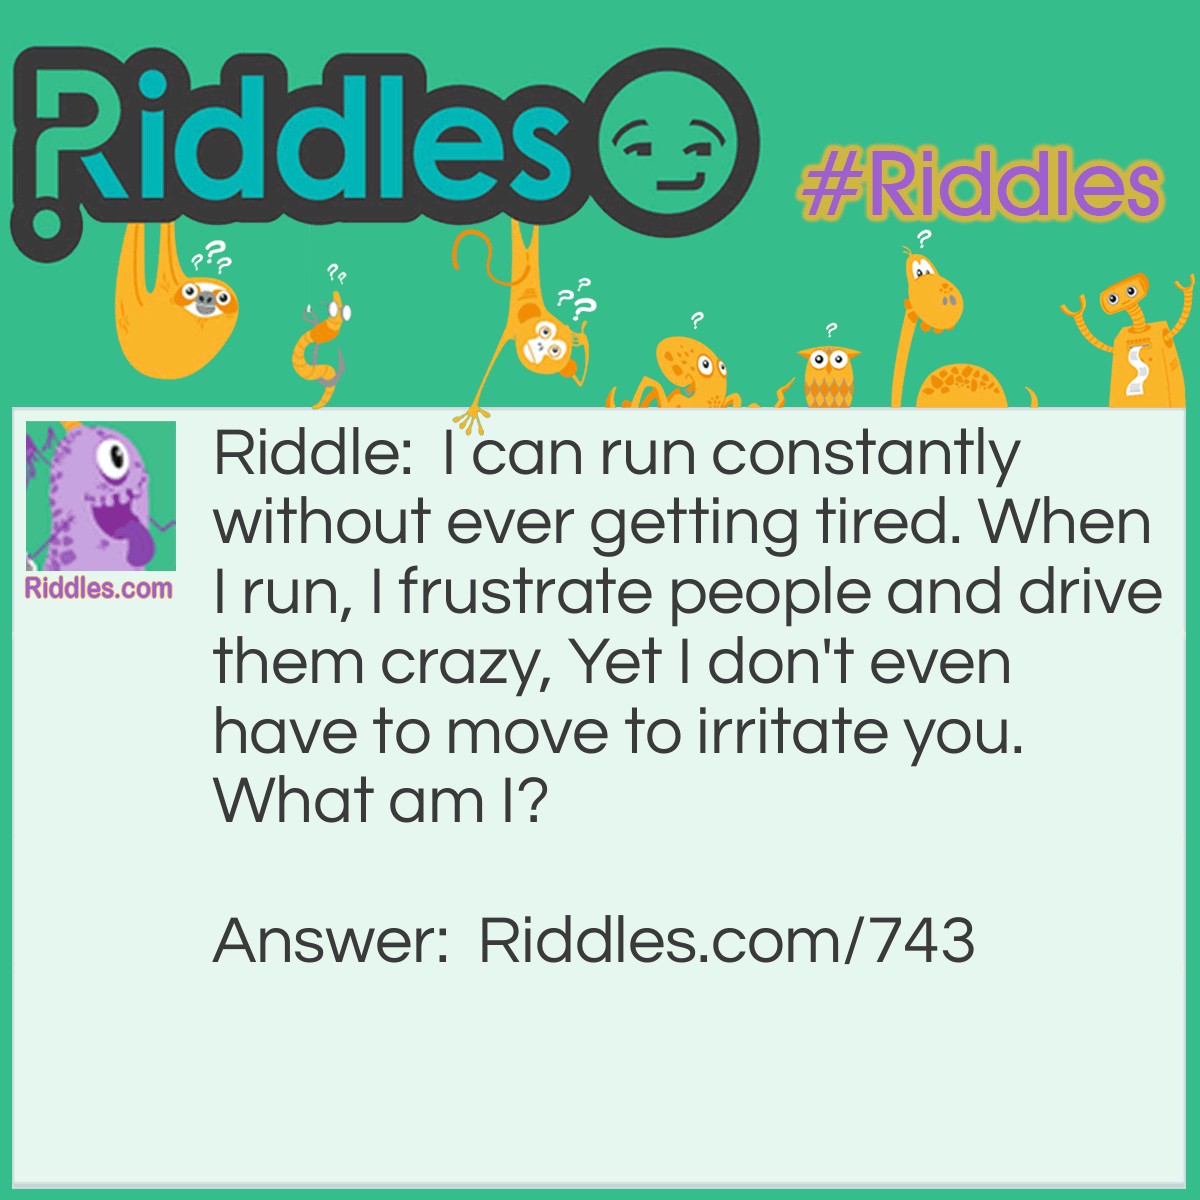 Riddle: I can run constantly without ever getting tired. When I run, I frustrate people and drive them crazy, Yet I don't even have to move to irritate you. 
What am I? Answer: I am a runny nose.